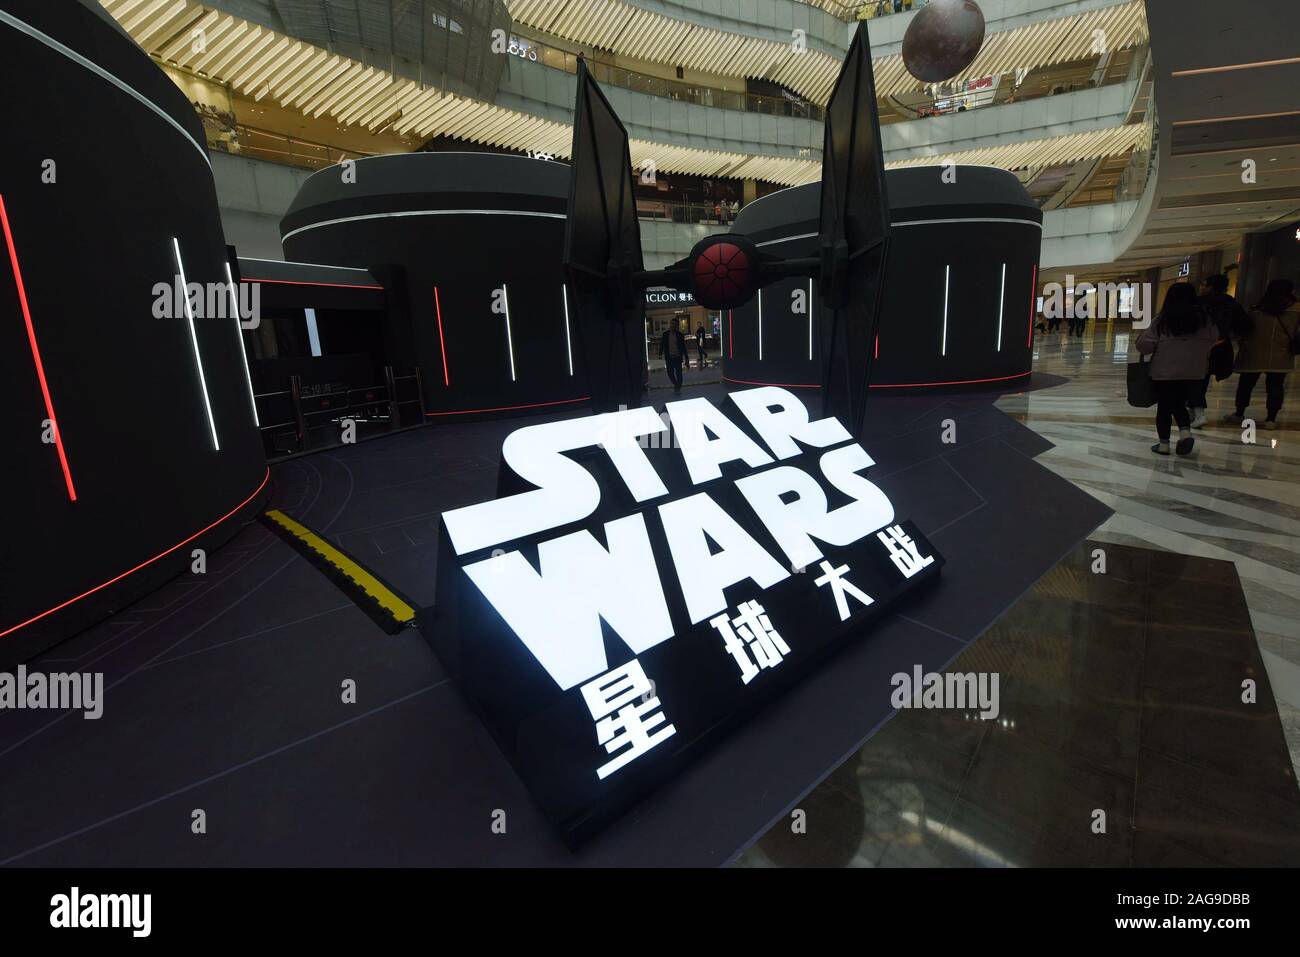 Zhejiang, Zhejiang, China. 18th Dec, 2019. Zhejiang, CHINA-Star Wars: The Rise of Skywalker hits theaters Dec. 20, 2019.A shopping mall in Hangzhou, east China's Zhejiang province, has launched a special Star Wars exhibition, which has attracted many Star Wars fans to watch the exhibition and learn more about Star Wars. Credit: SIPA Asia/ZUMA Wire/Alamy Live News Stock Photo